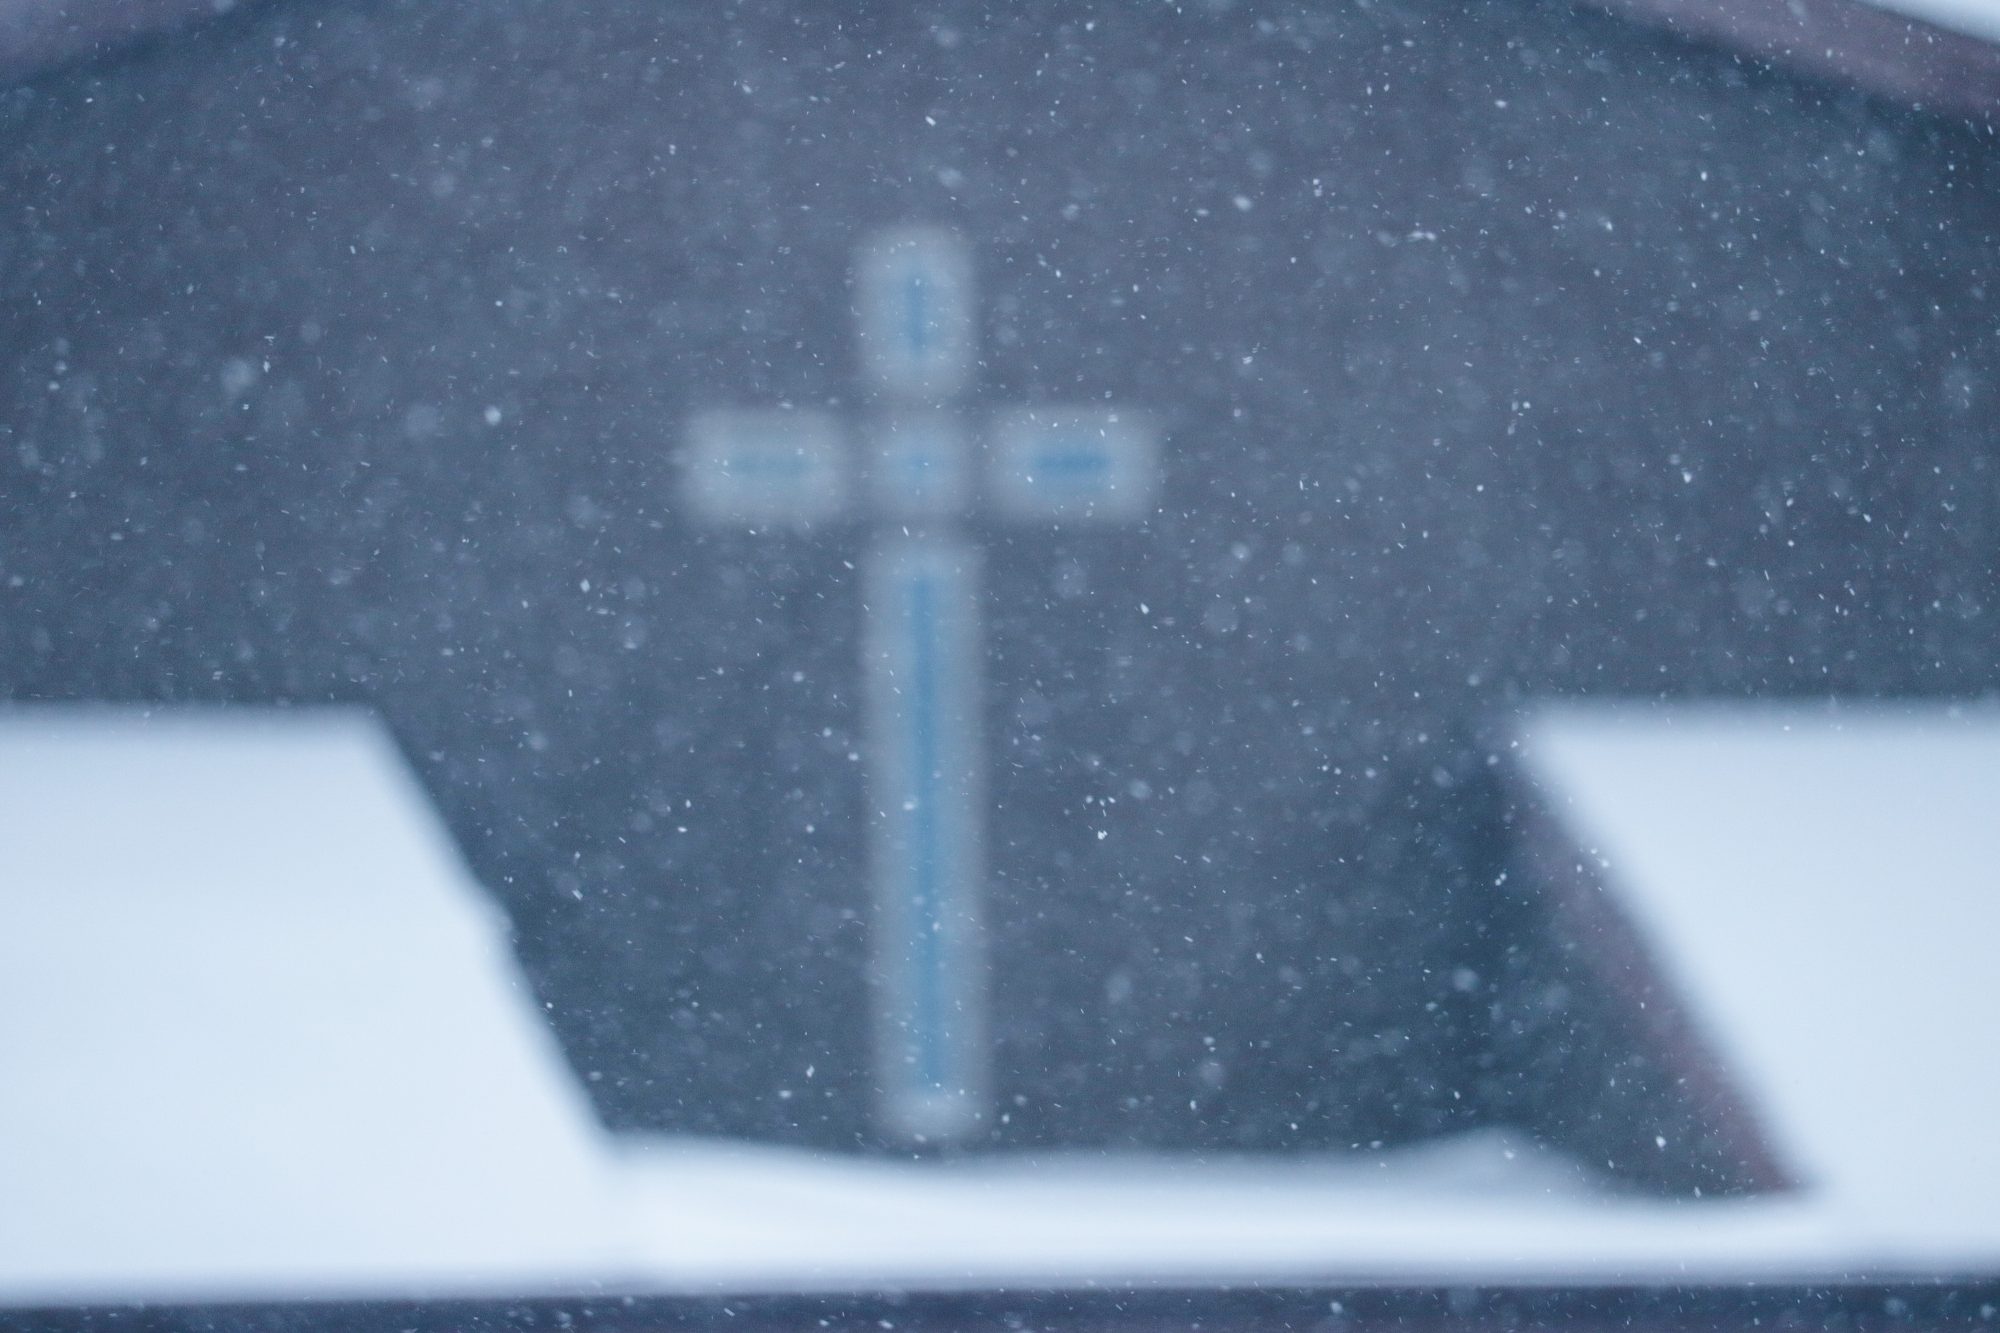 The image is of a white cross in the distance made blurry by the snowfall